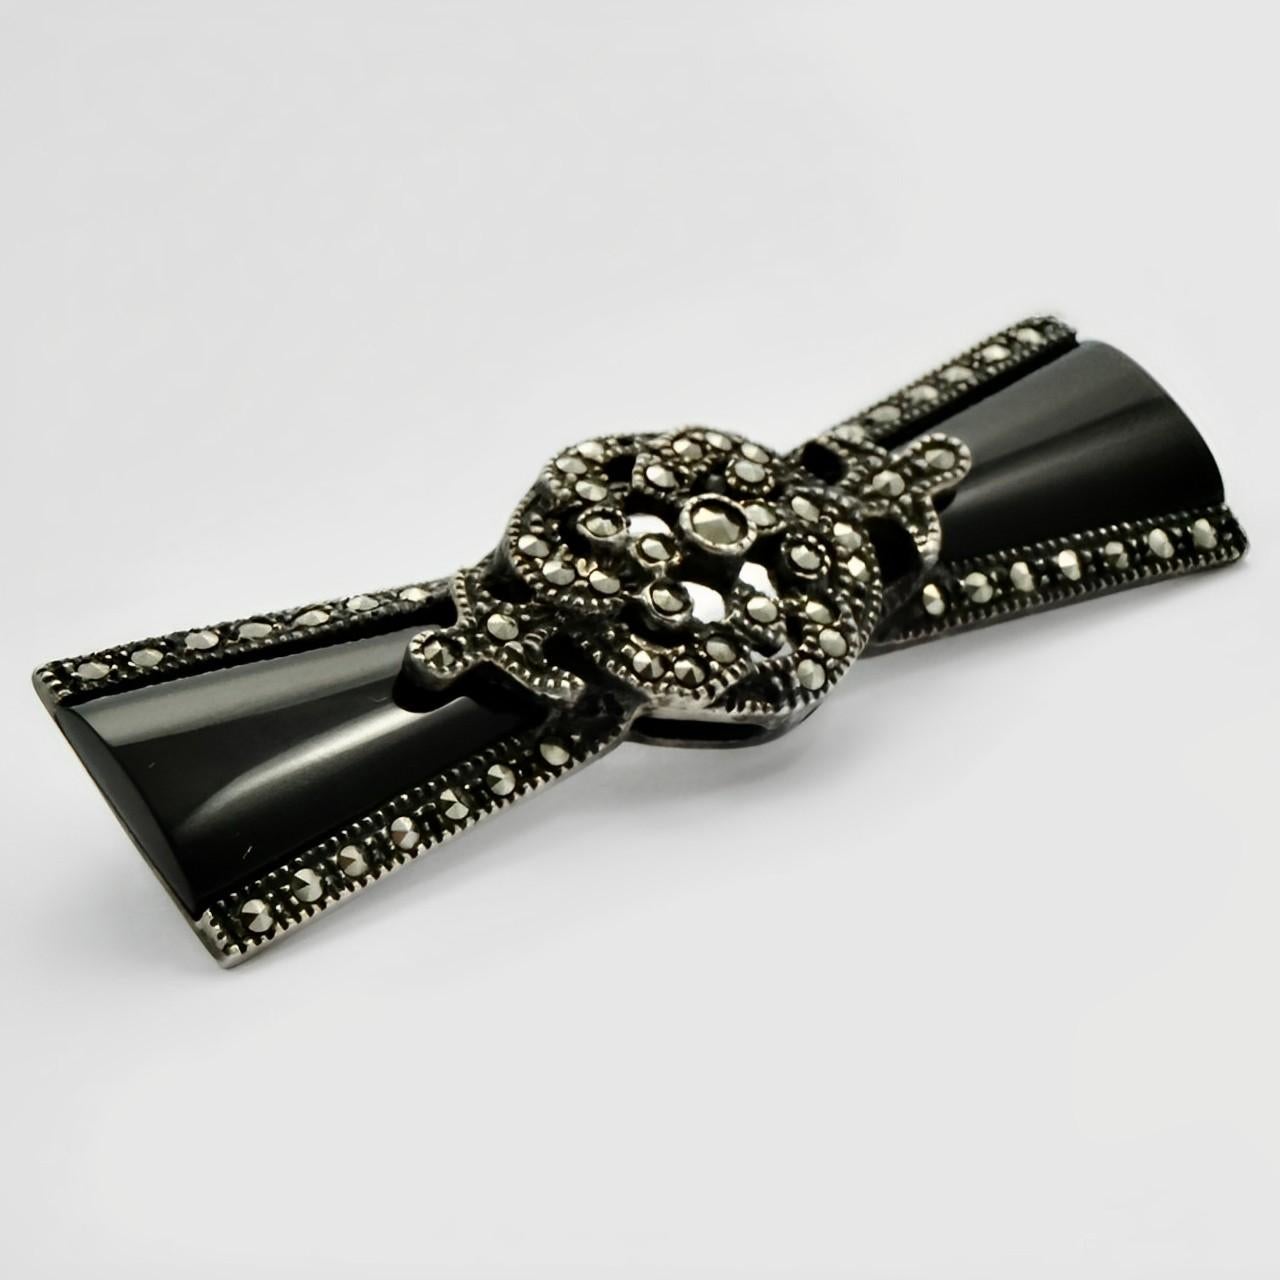 Beautiful sterling silver and black glass Art Deco style brooch with a flower design. It is set with marcasites and has a black enamel finish. Measuring length 5 cm / 1.9 inches by width 1.5 cm / .5 inch.

This is a stylish silver brooch with black